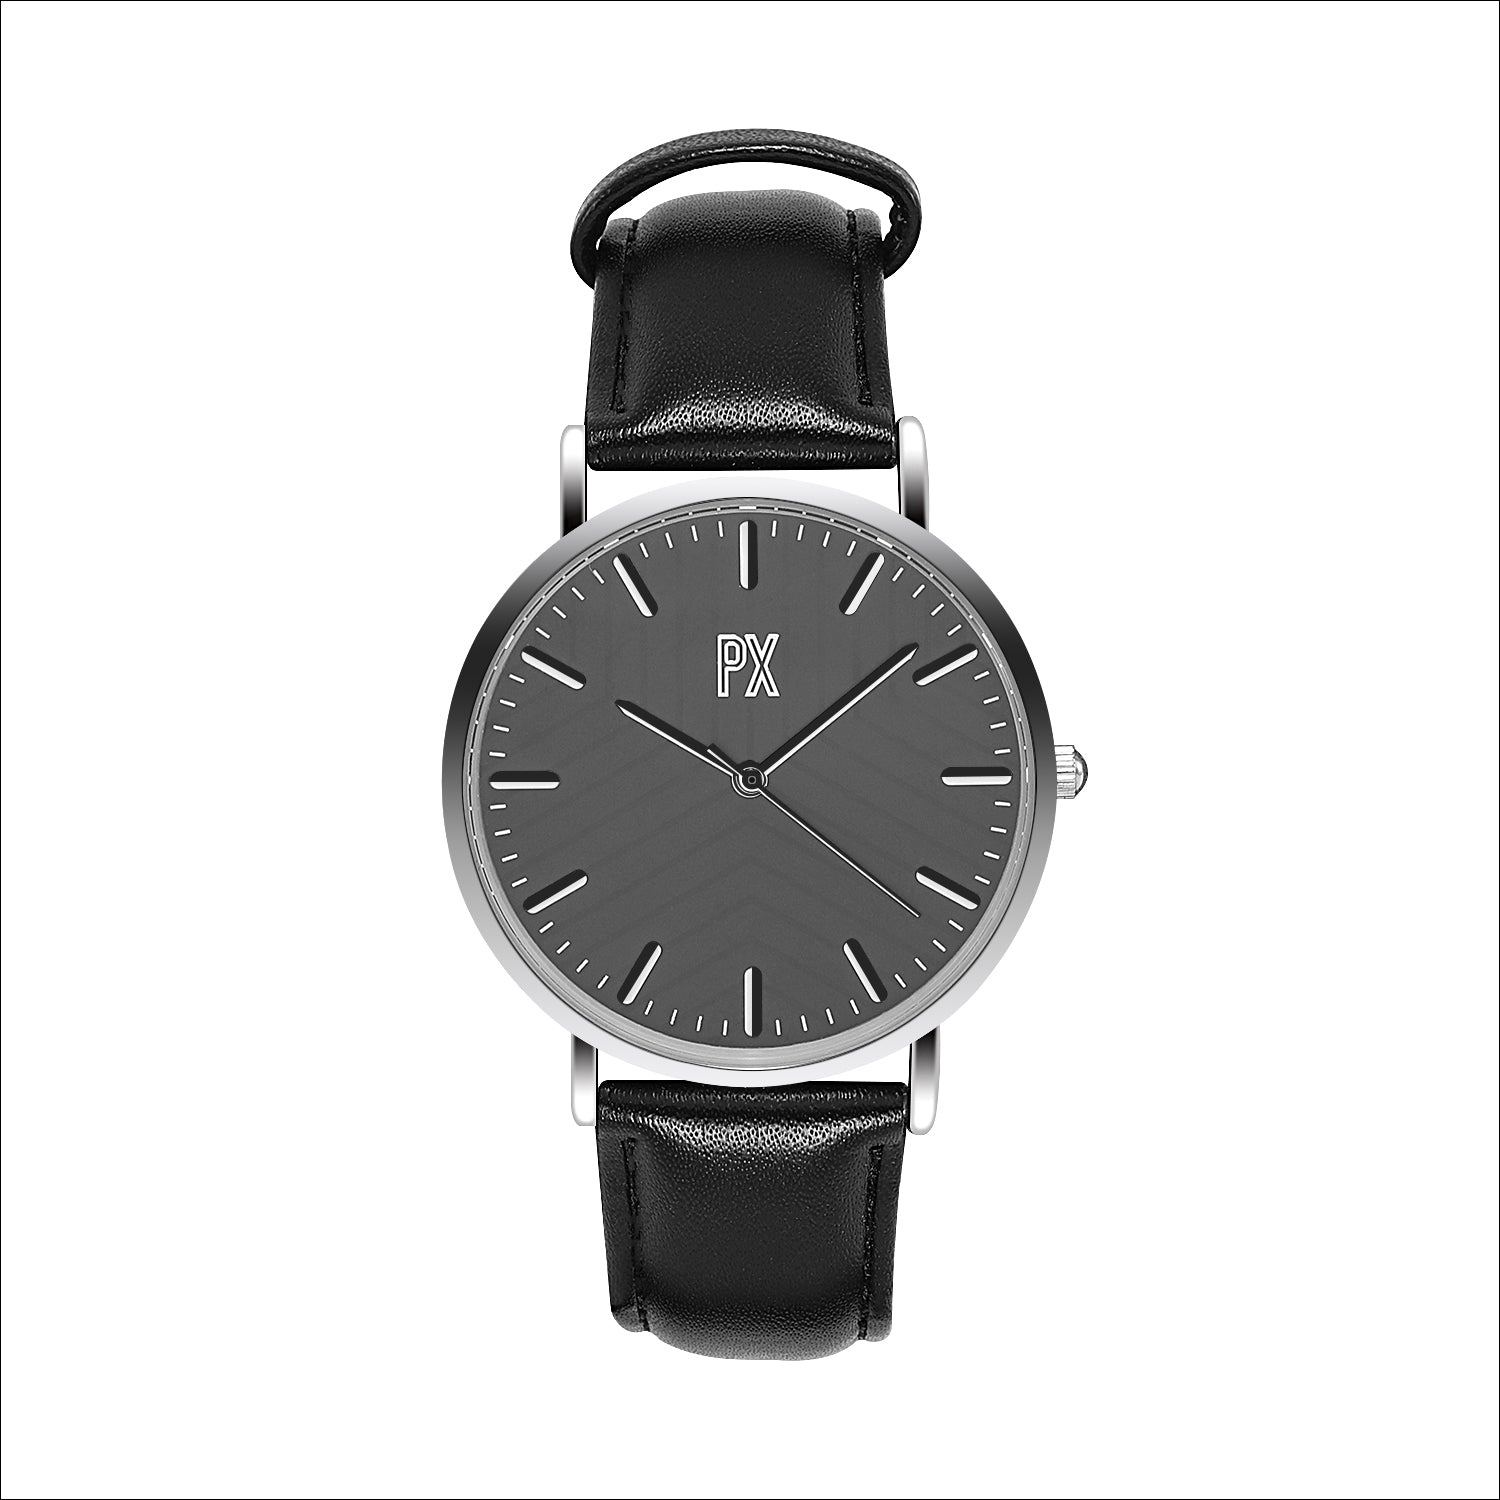 PX Black Strap Watch with Black Printed Face